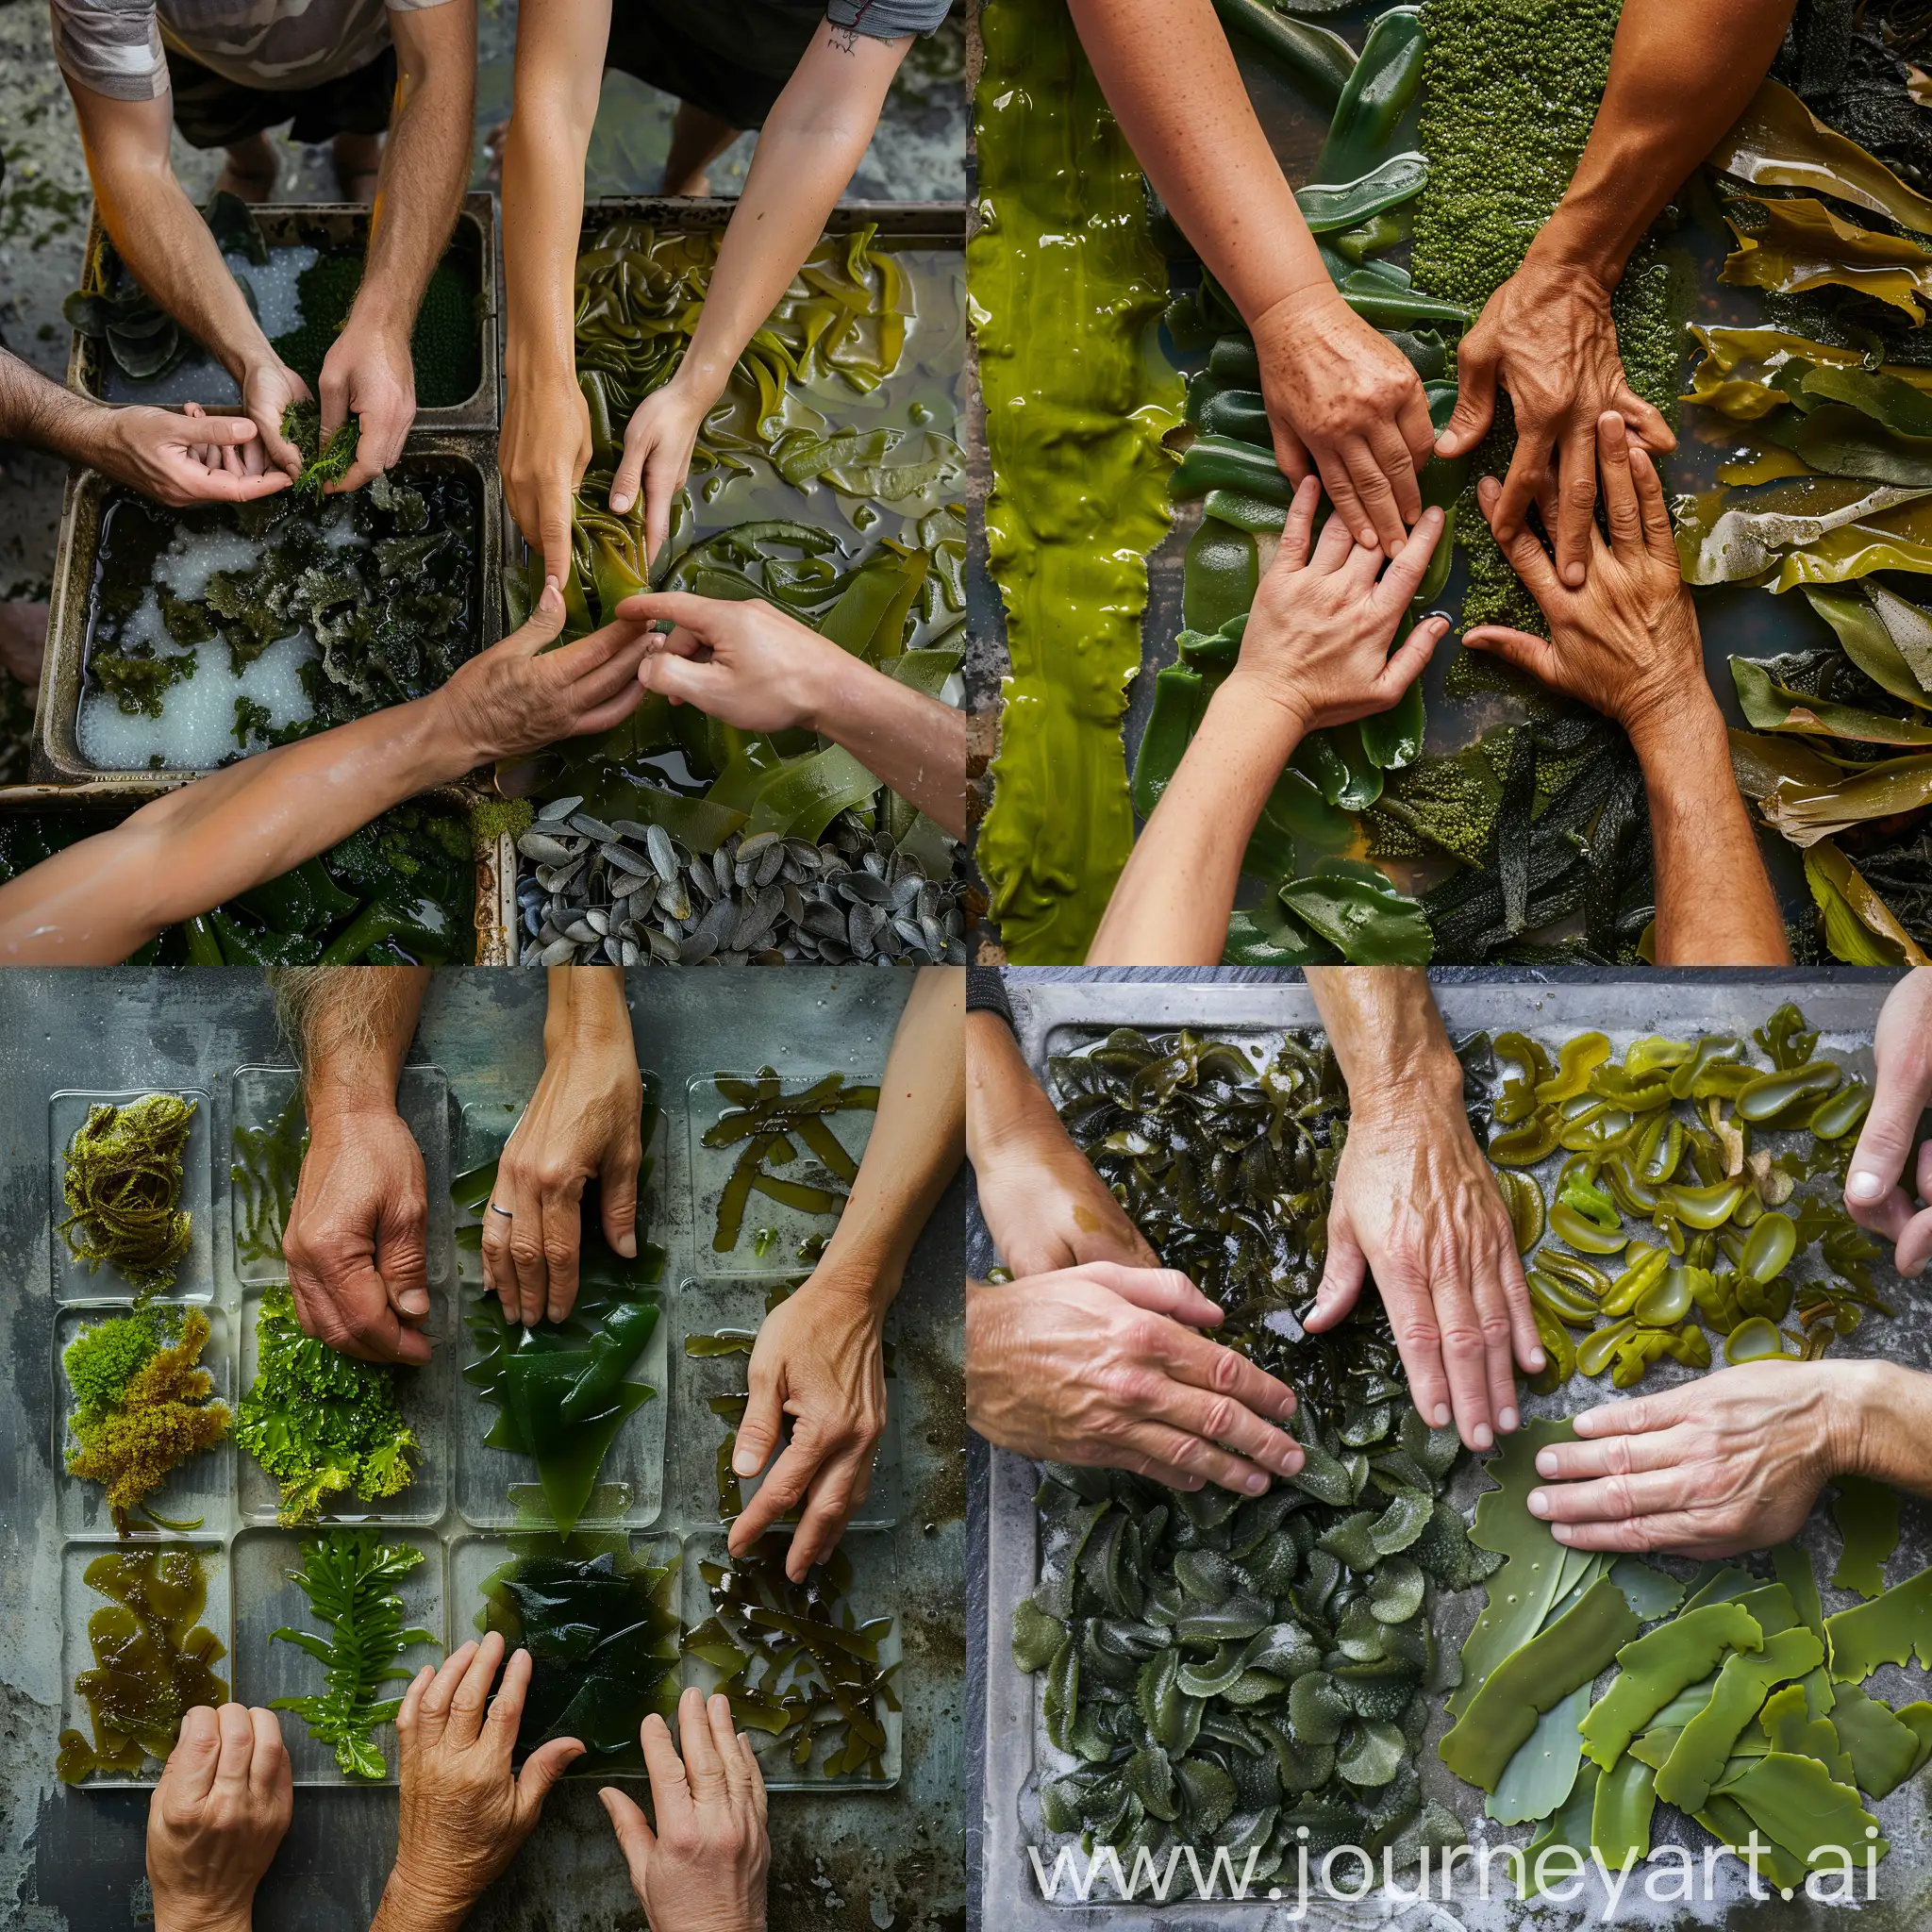 show people touching different types of algae